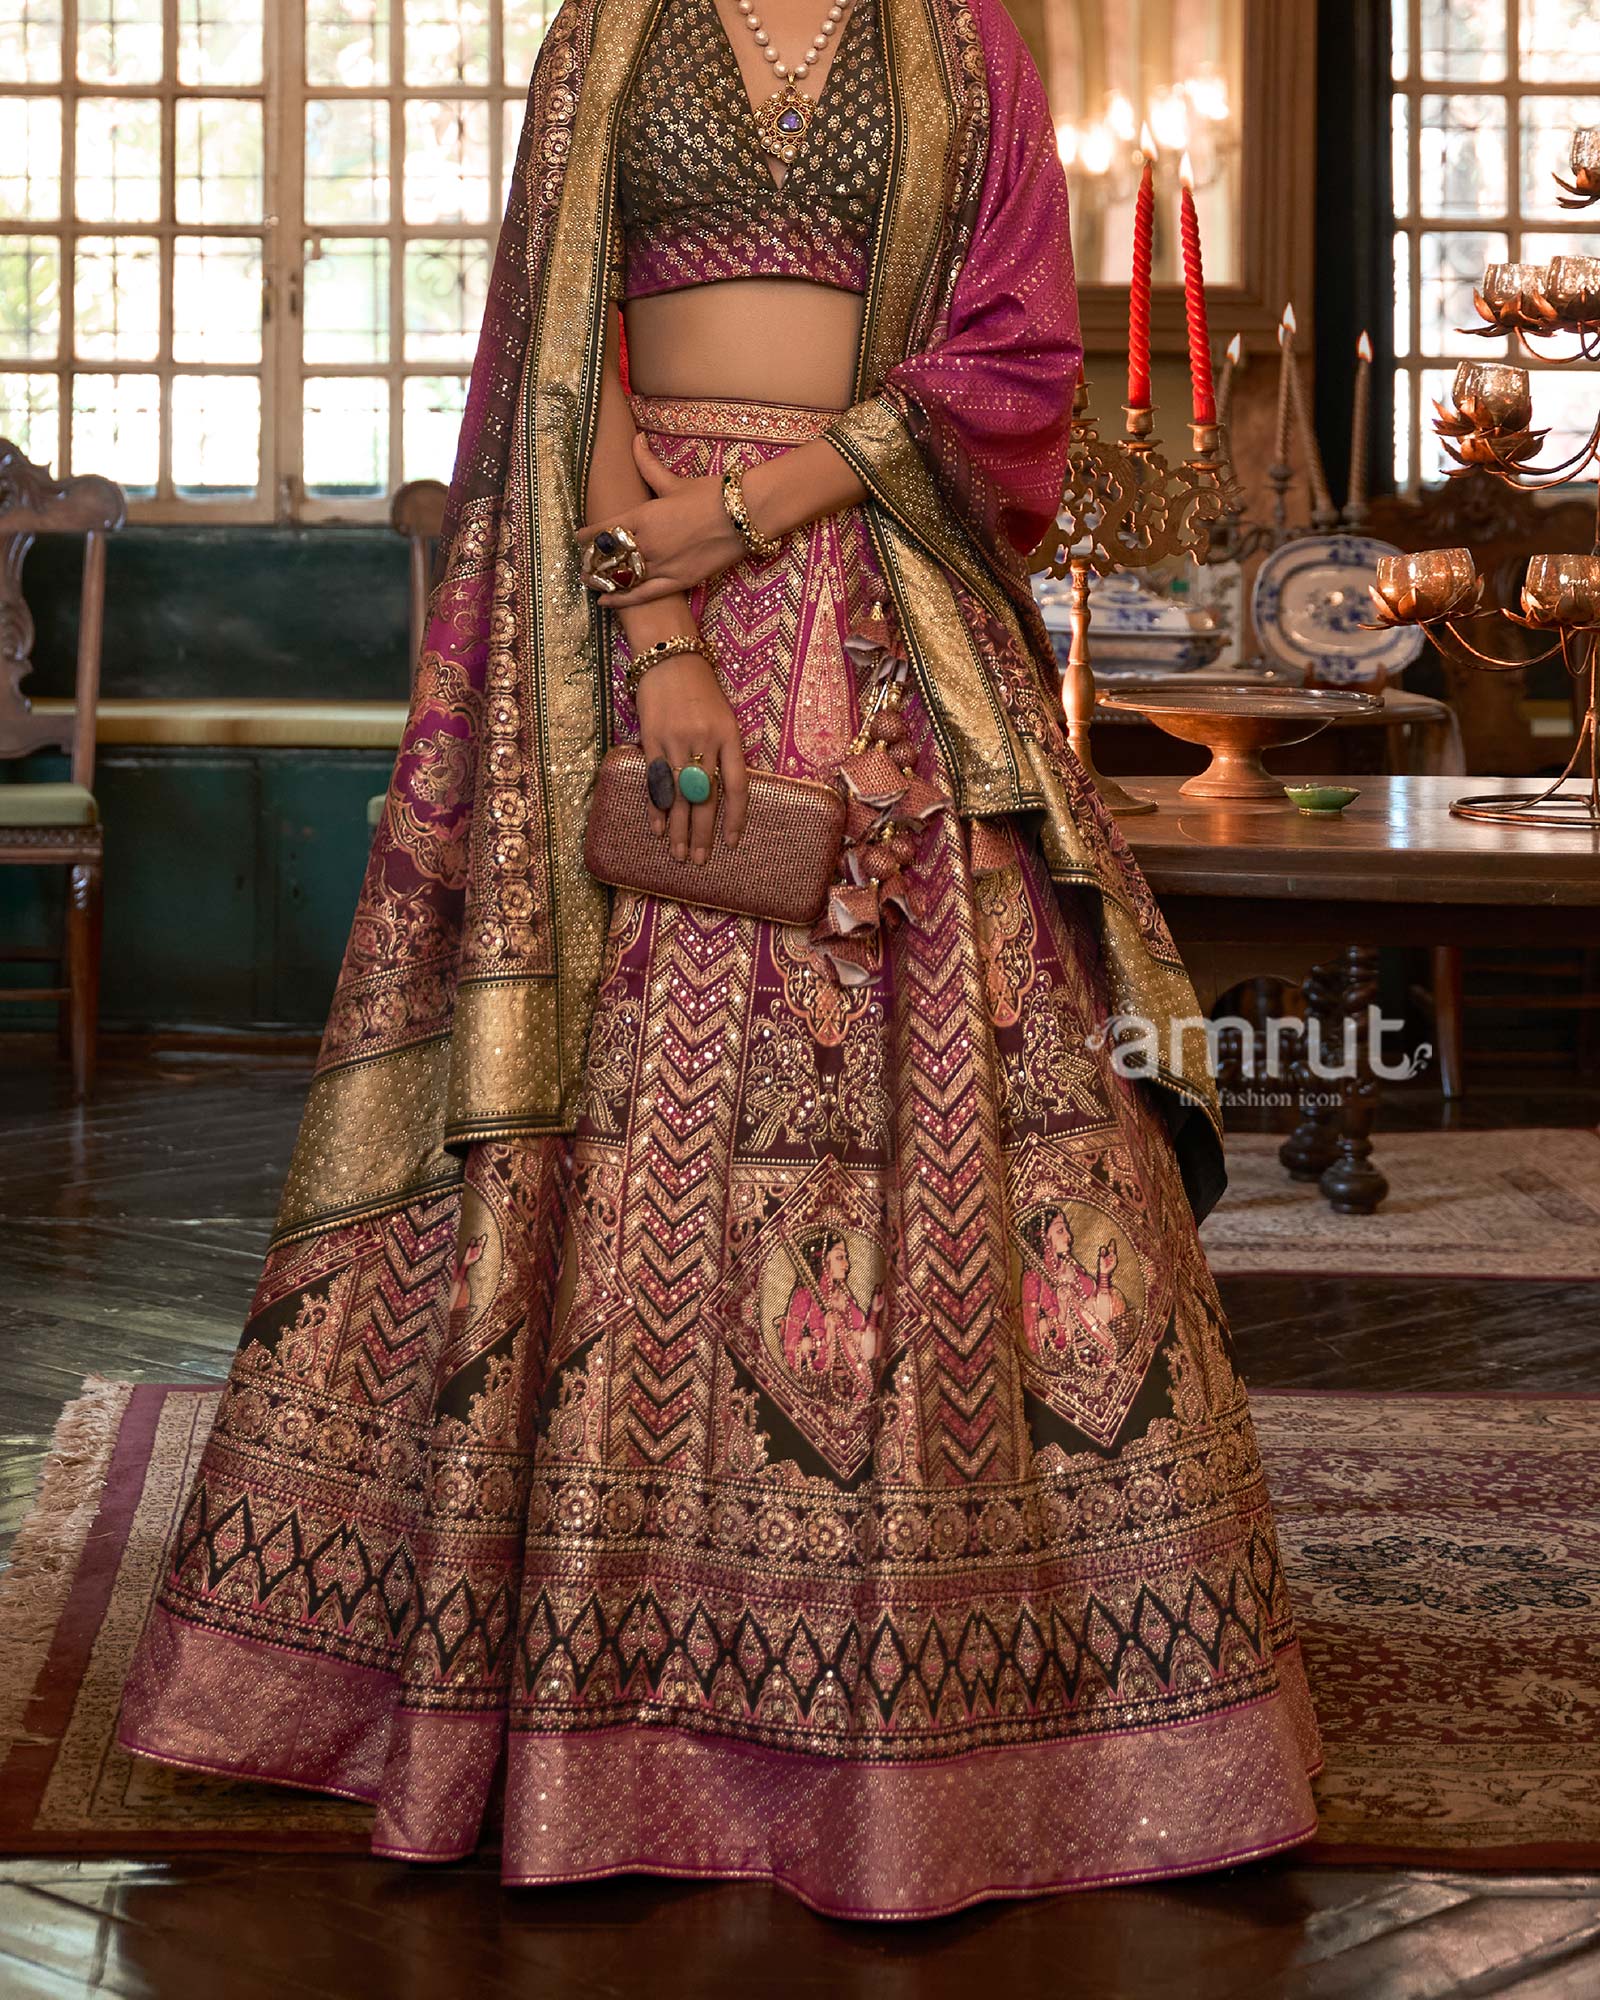 Pink lehenga with gold embroidery and gold zari work · Free Stock Photo